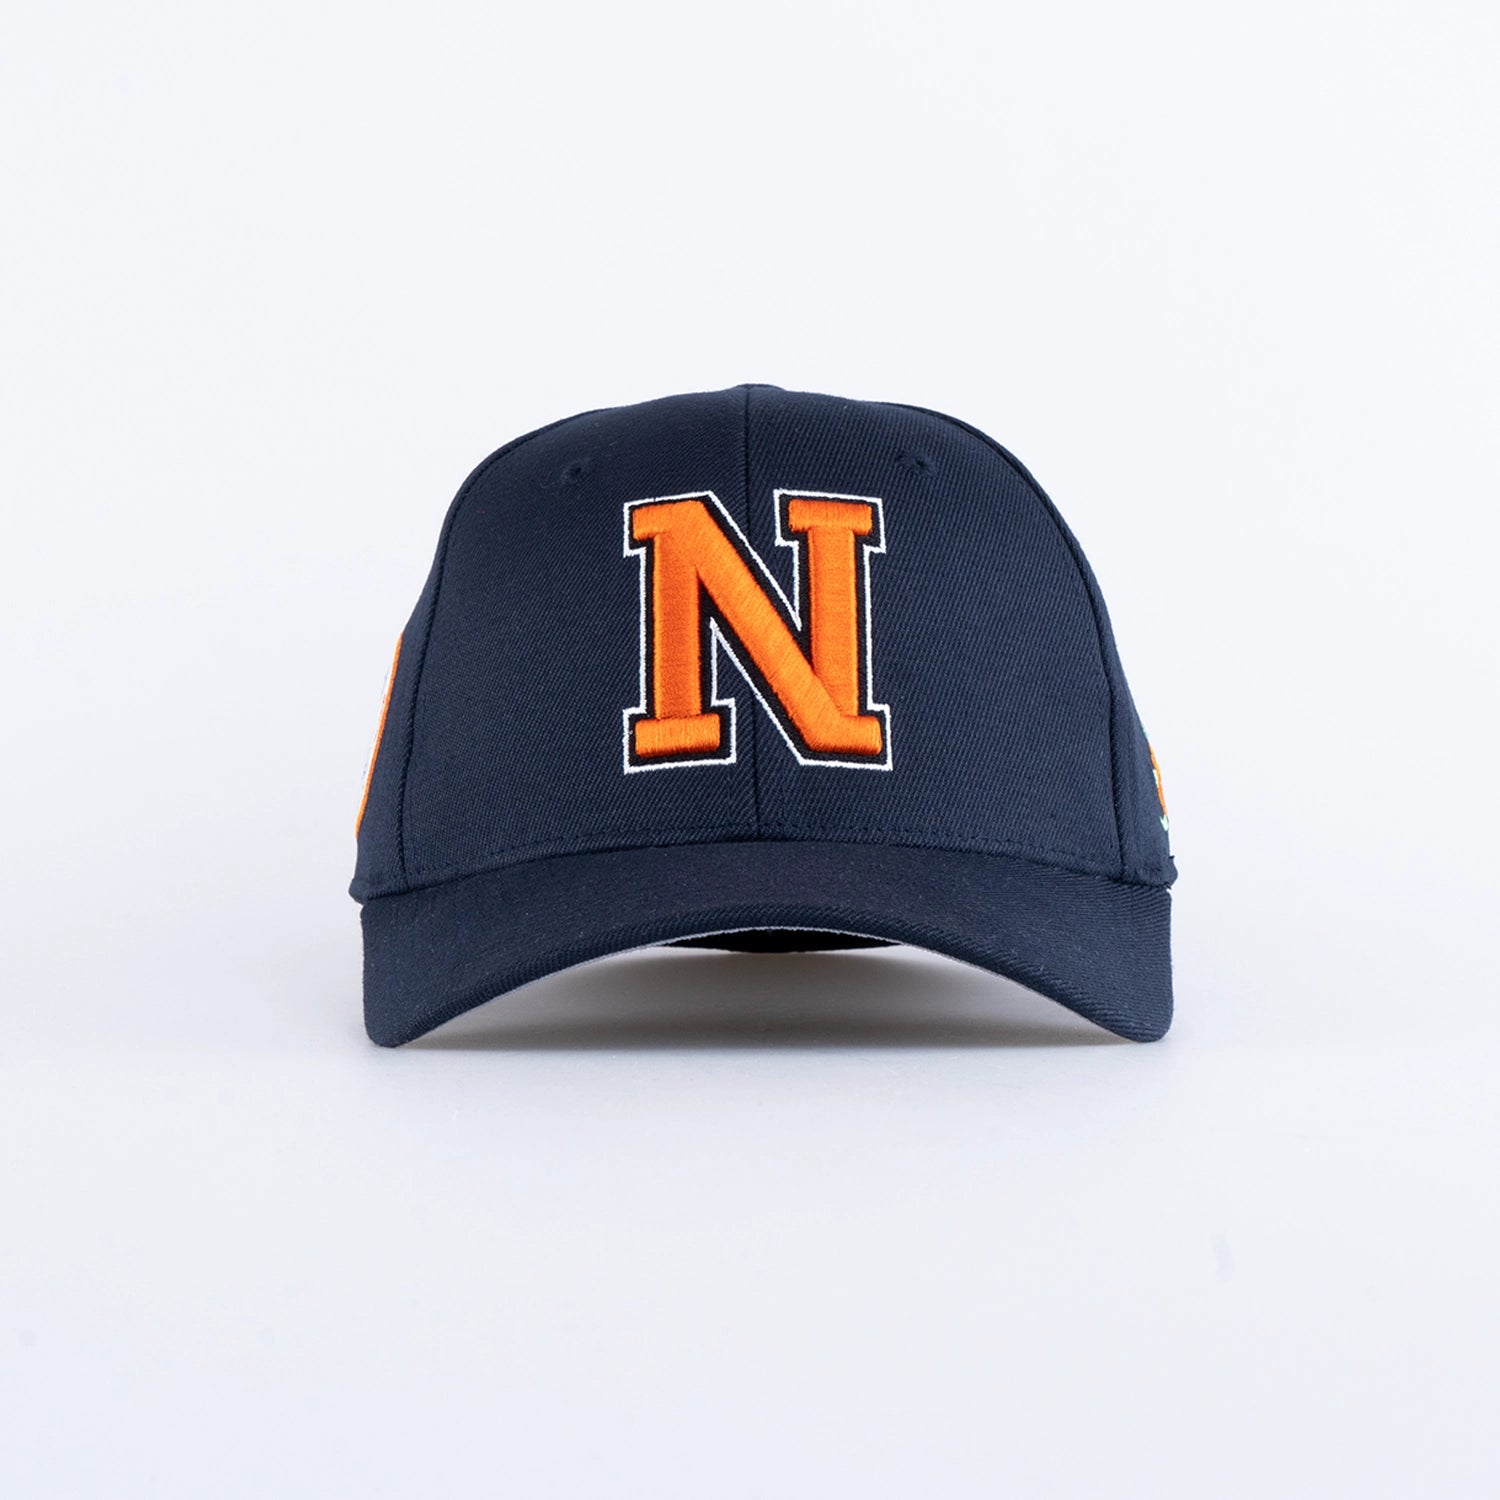 ATHLETIC FITTED KEPS - HOOKED NAVY